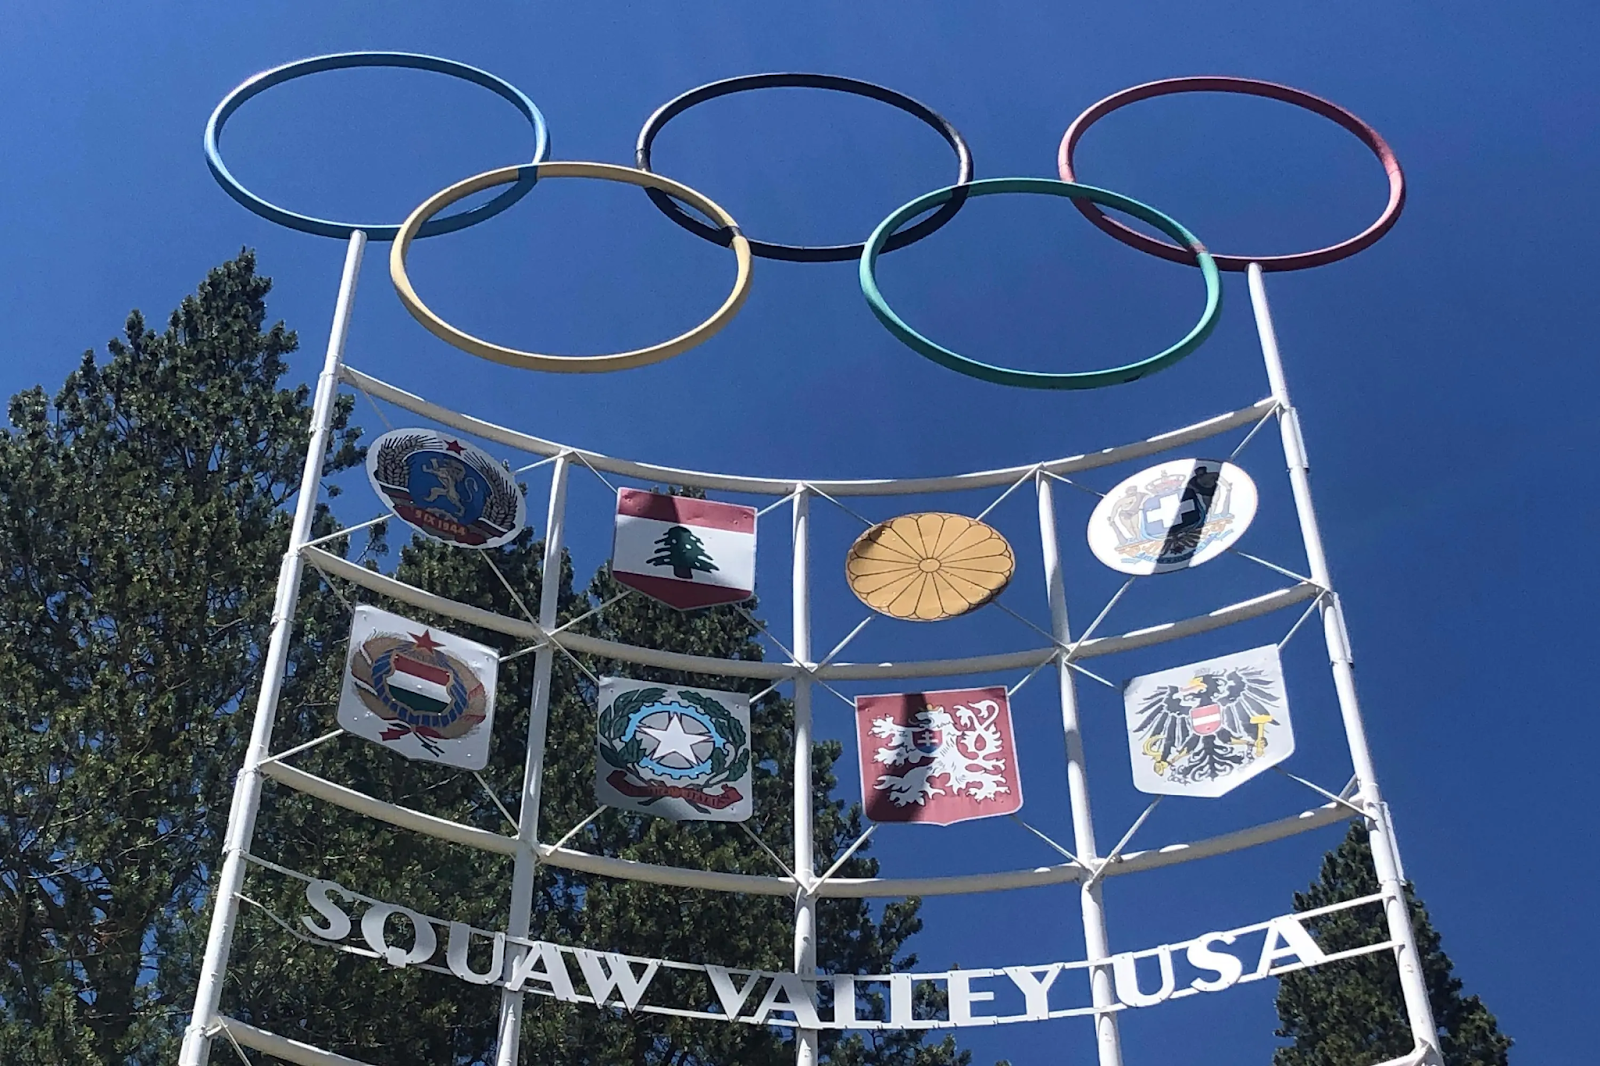 Squaw Valley is also a great destination in the area. - The Mercury News